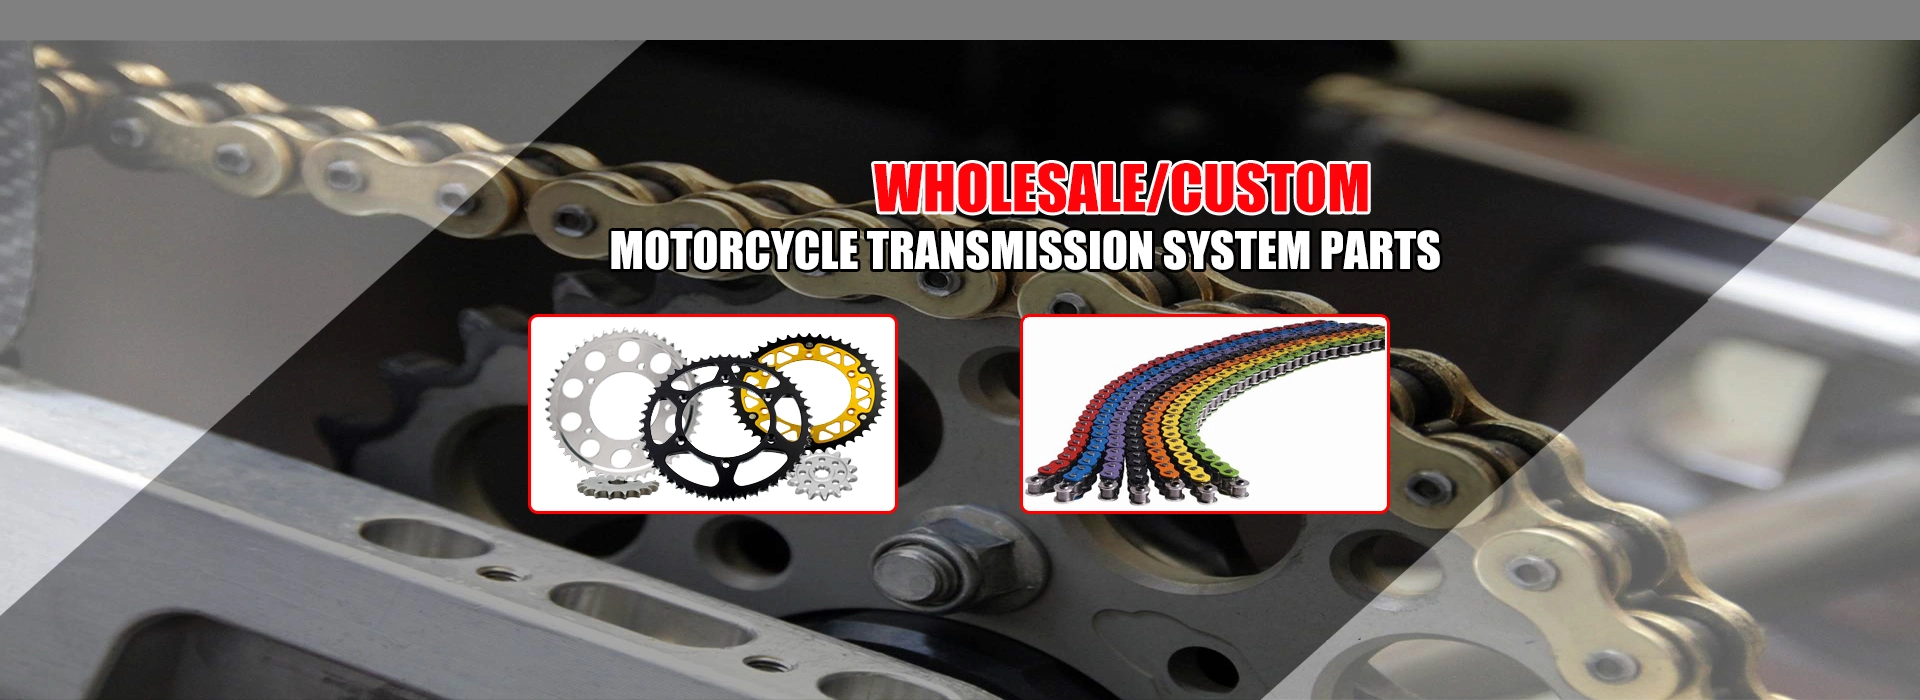 motorcycle transmisson system parts